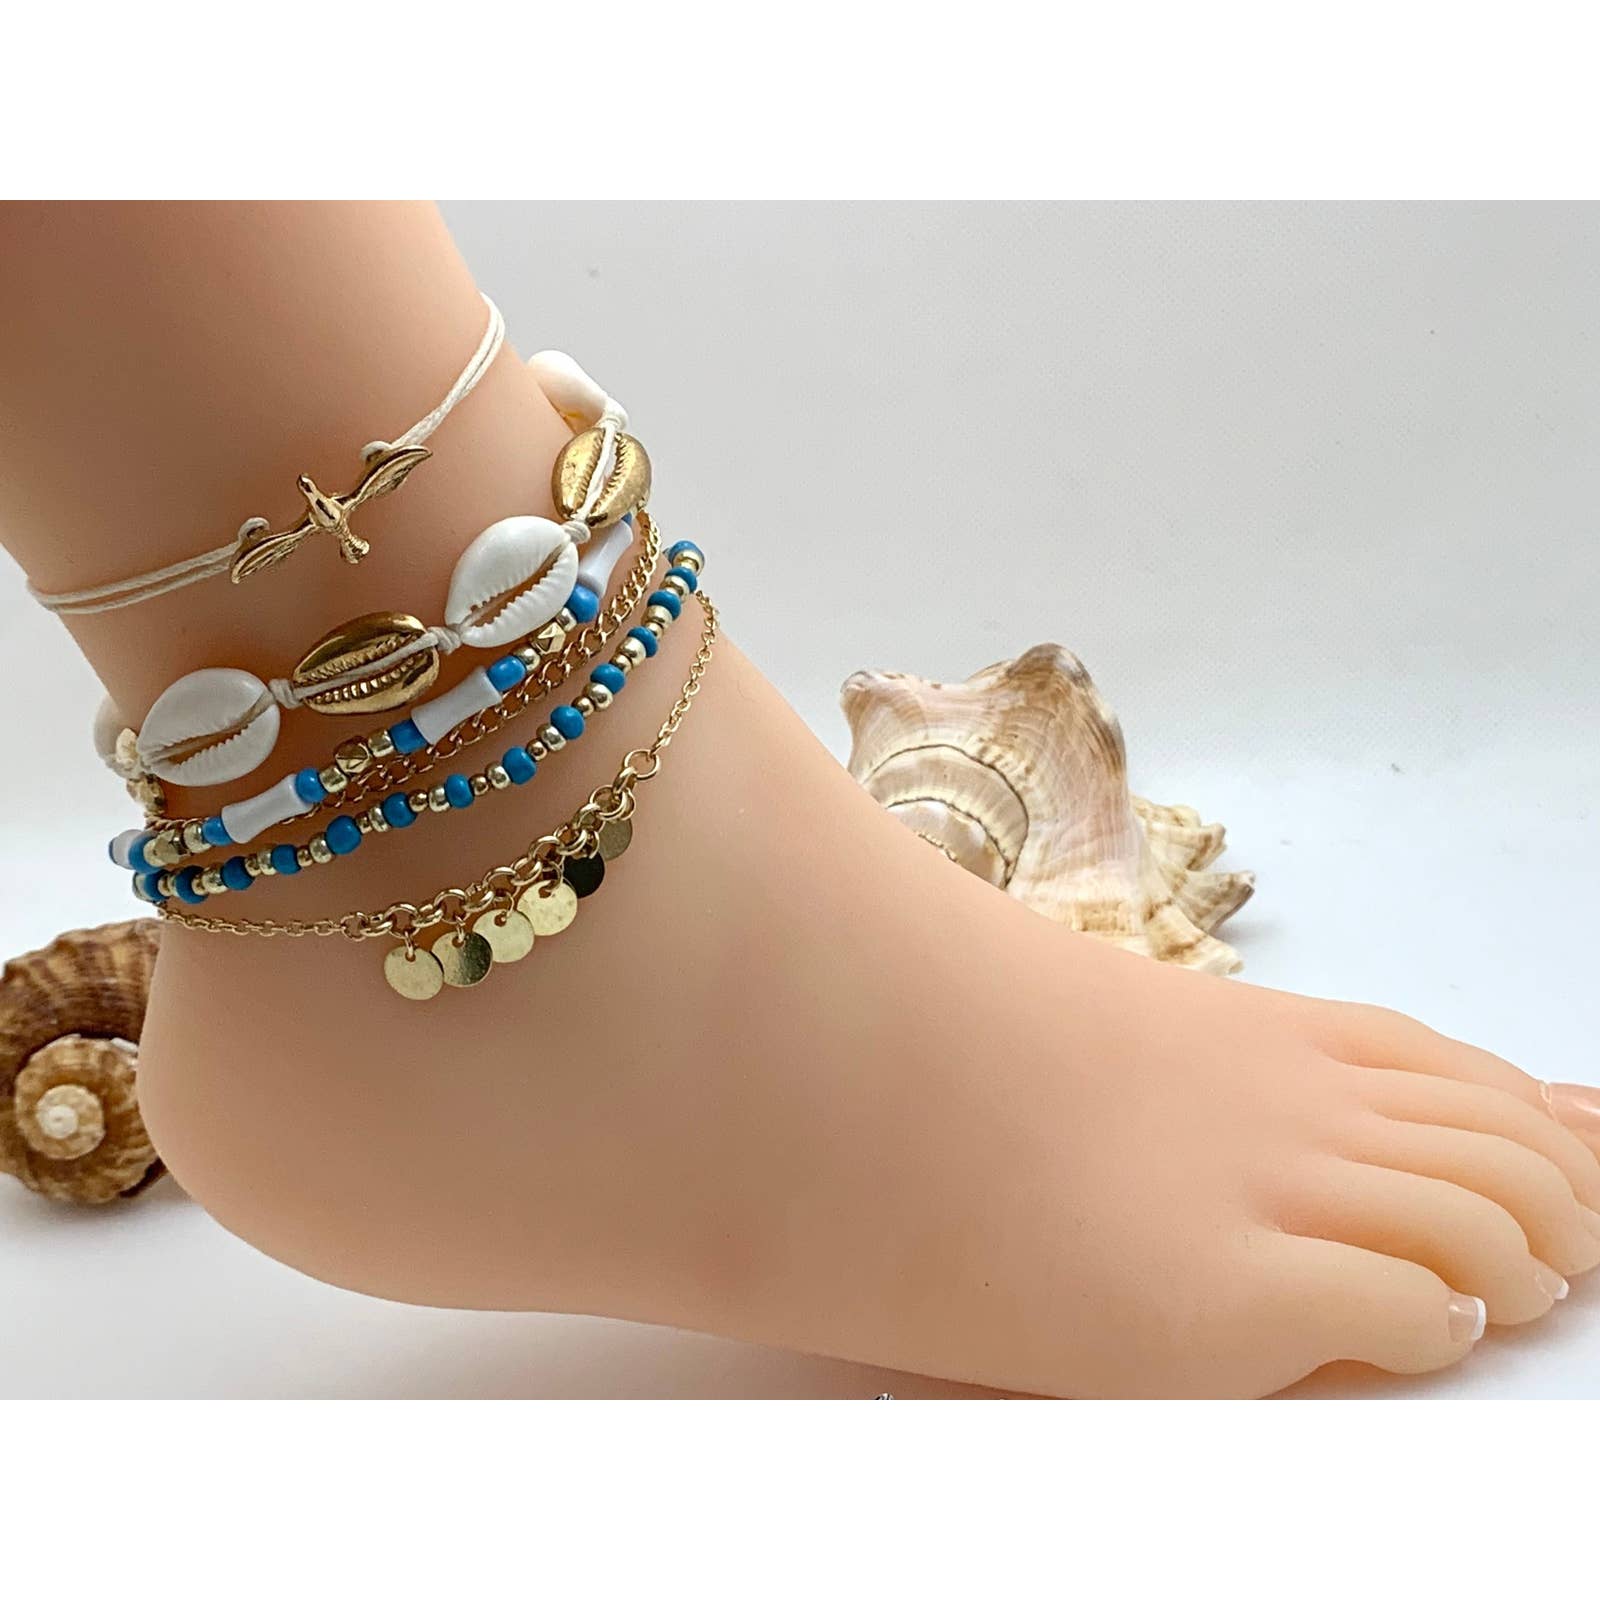 Edary Beach Crystal Anklet Silver Ankle Bracelet with Rhinestone Foot  Accessories for Women and Girls(1PC) : Amazon.in: Jewellery